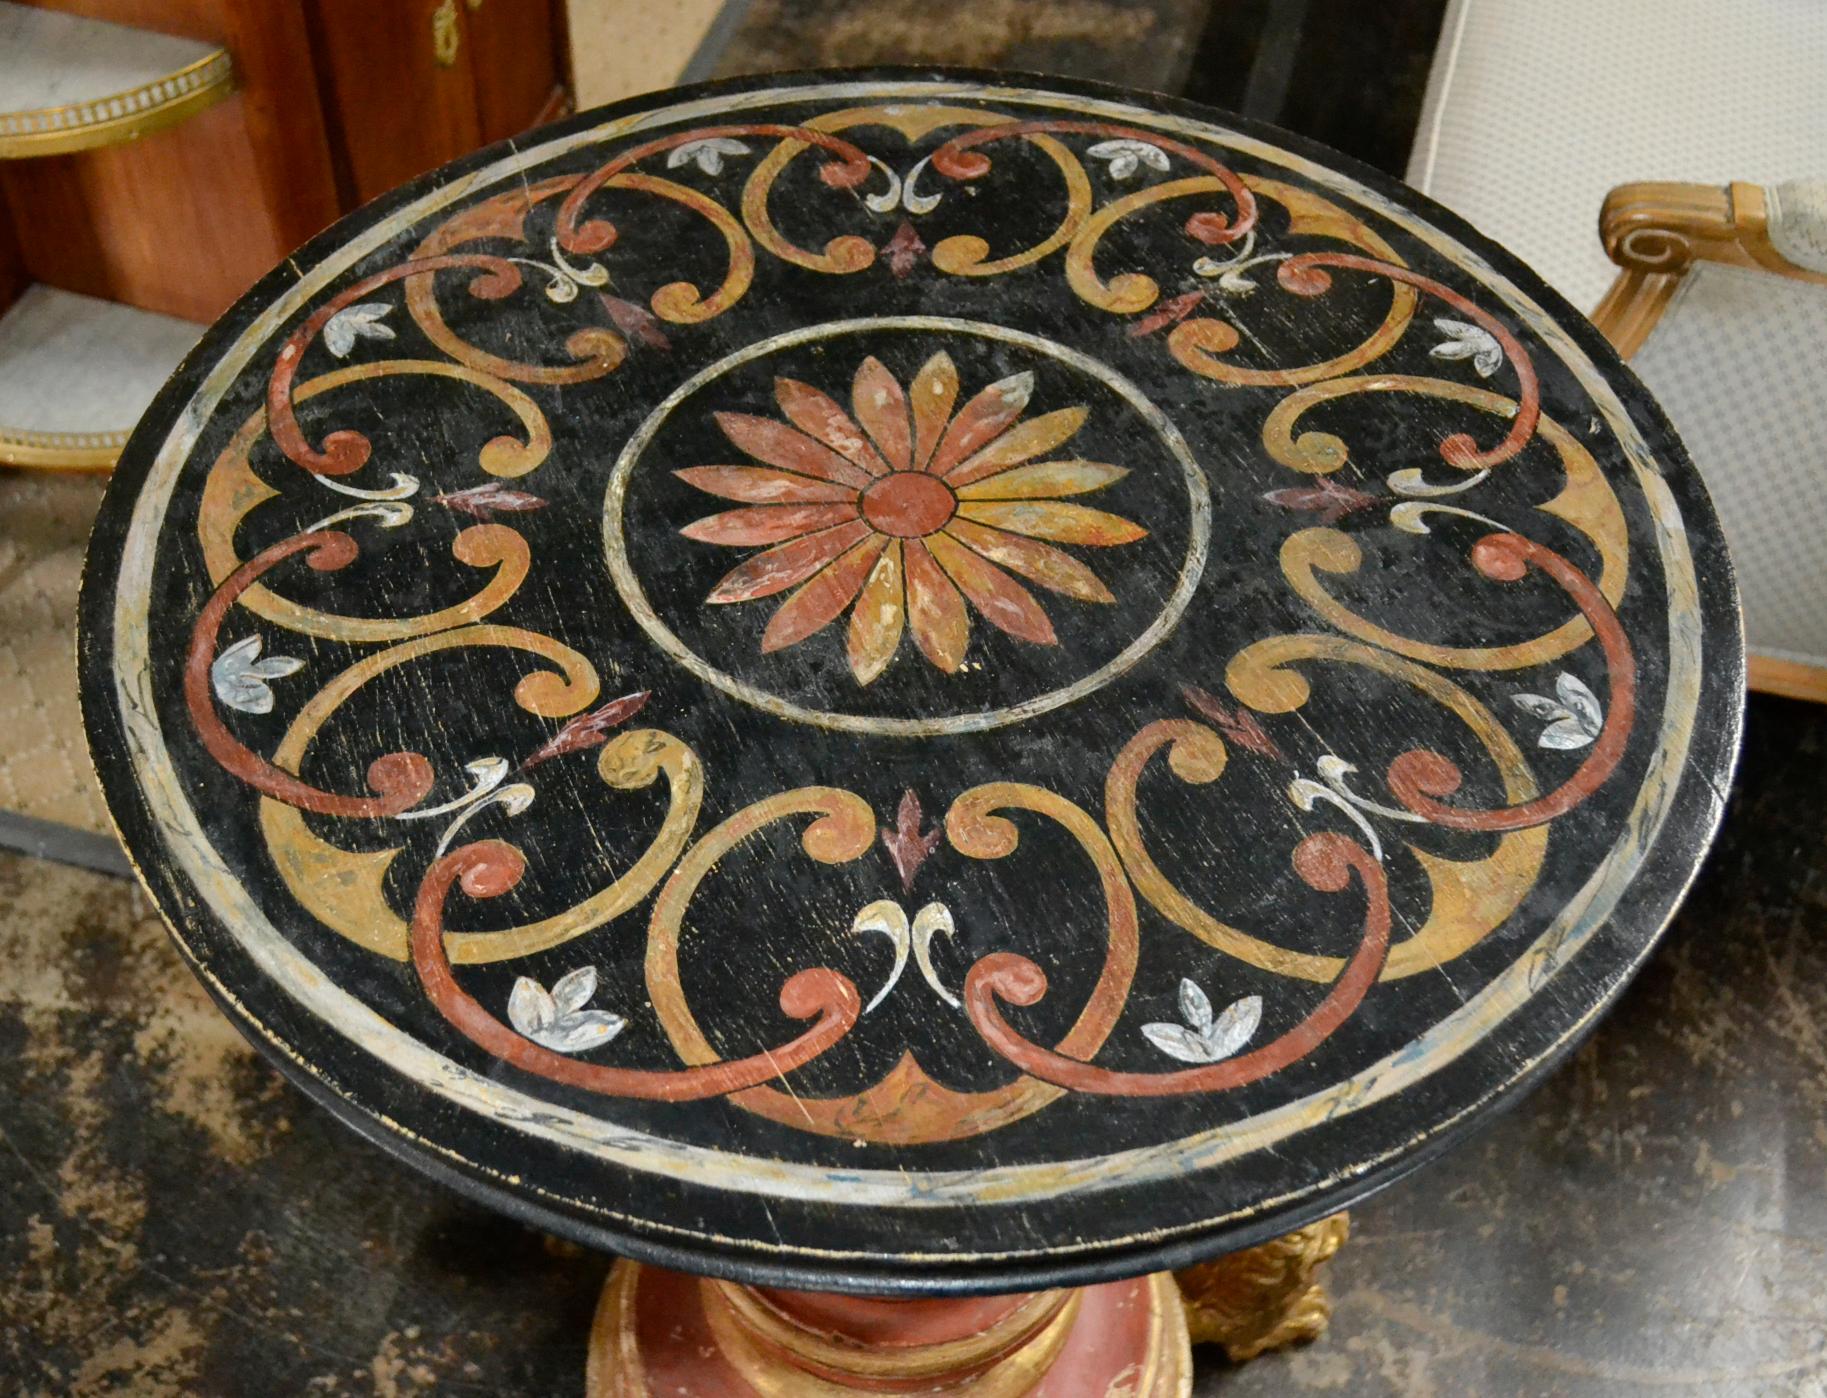 Unusual 19th century Italian painted and parcel-gilt pedestal table.